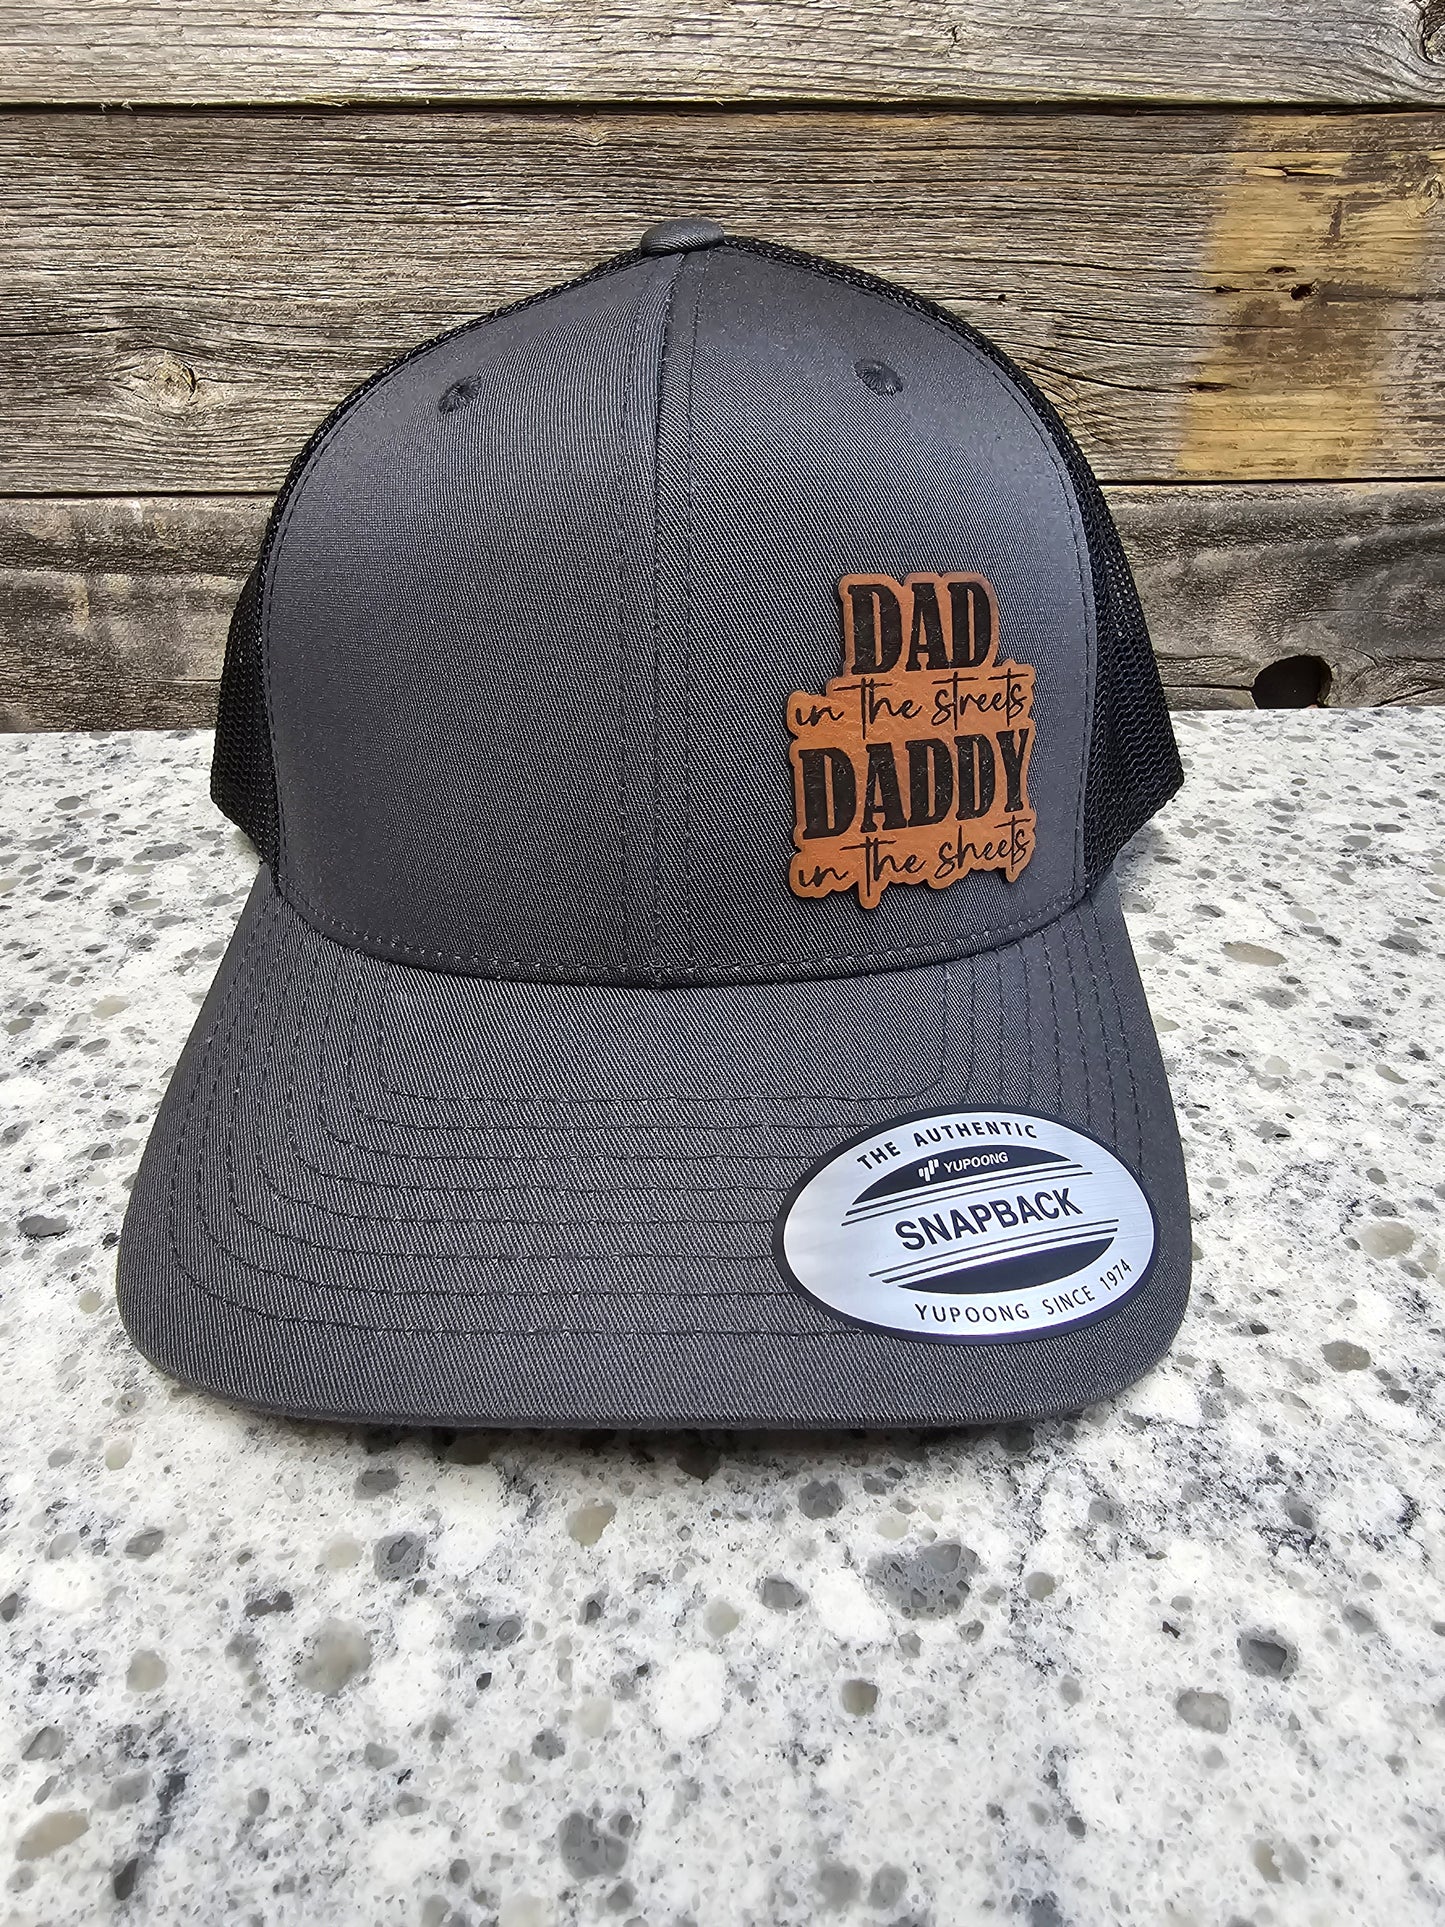 Dad on the streets, Daddy in the sheets on Richardson 112 Hat